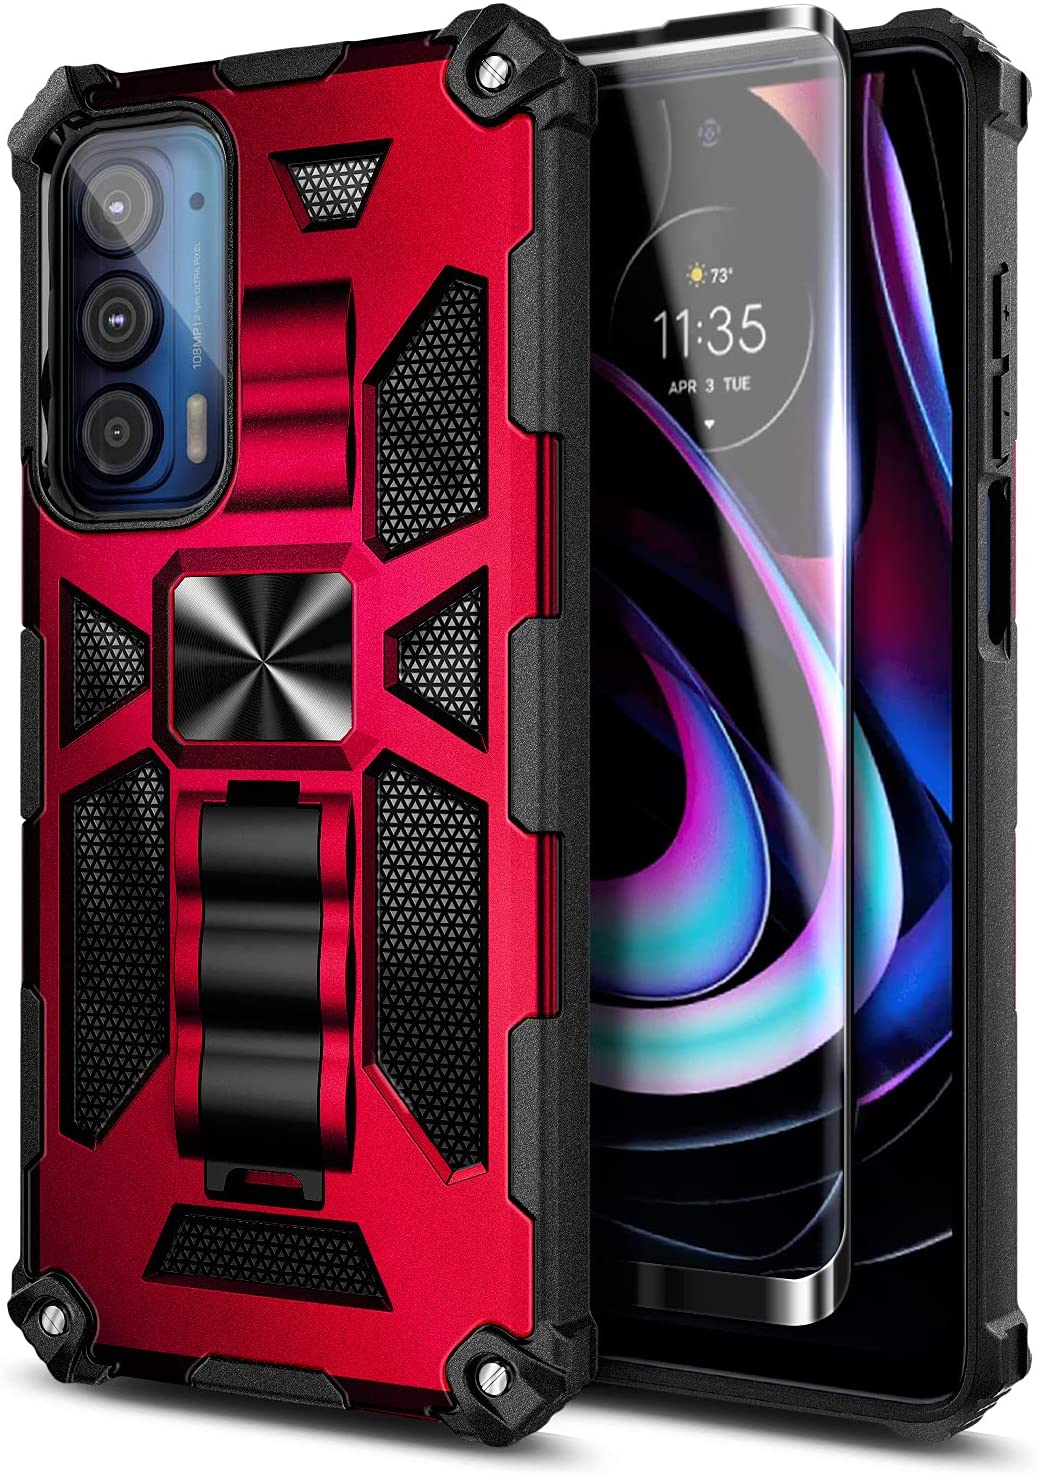 Nagebee Case for Motorola Moto Edge 5G UW, Moto Edge 2021 with Tempered Glass Screen Protector (Full Coverage), Full-Body Protective Shockproof [Military-Grade], Built in Kickstand Case (Red) - image 1 of 5